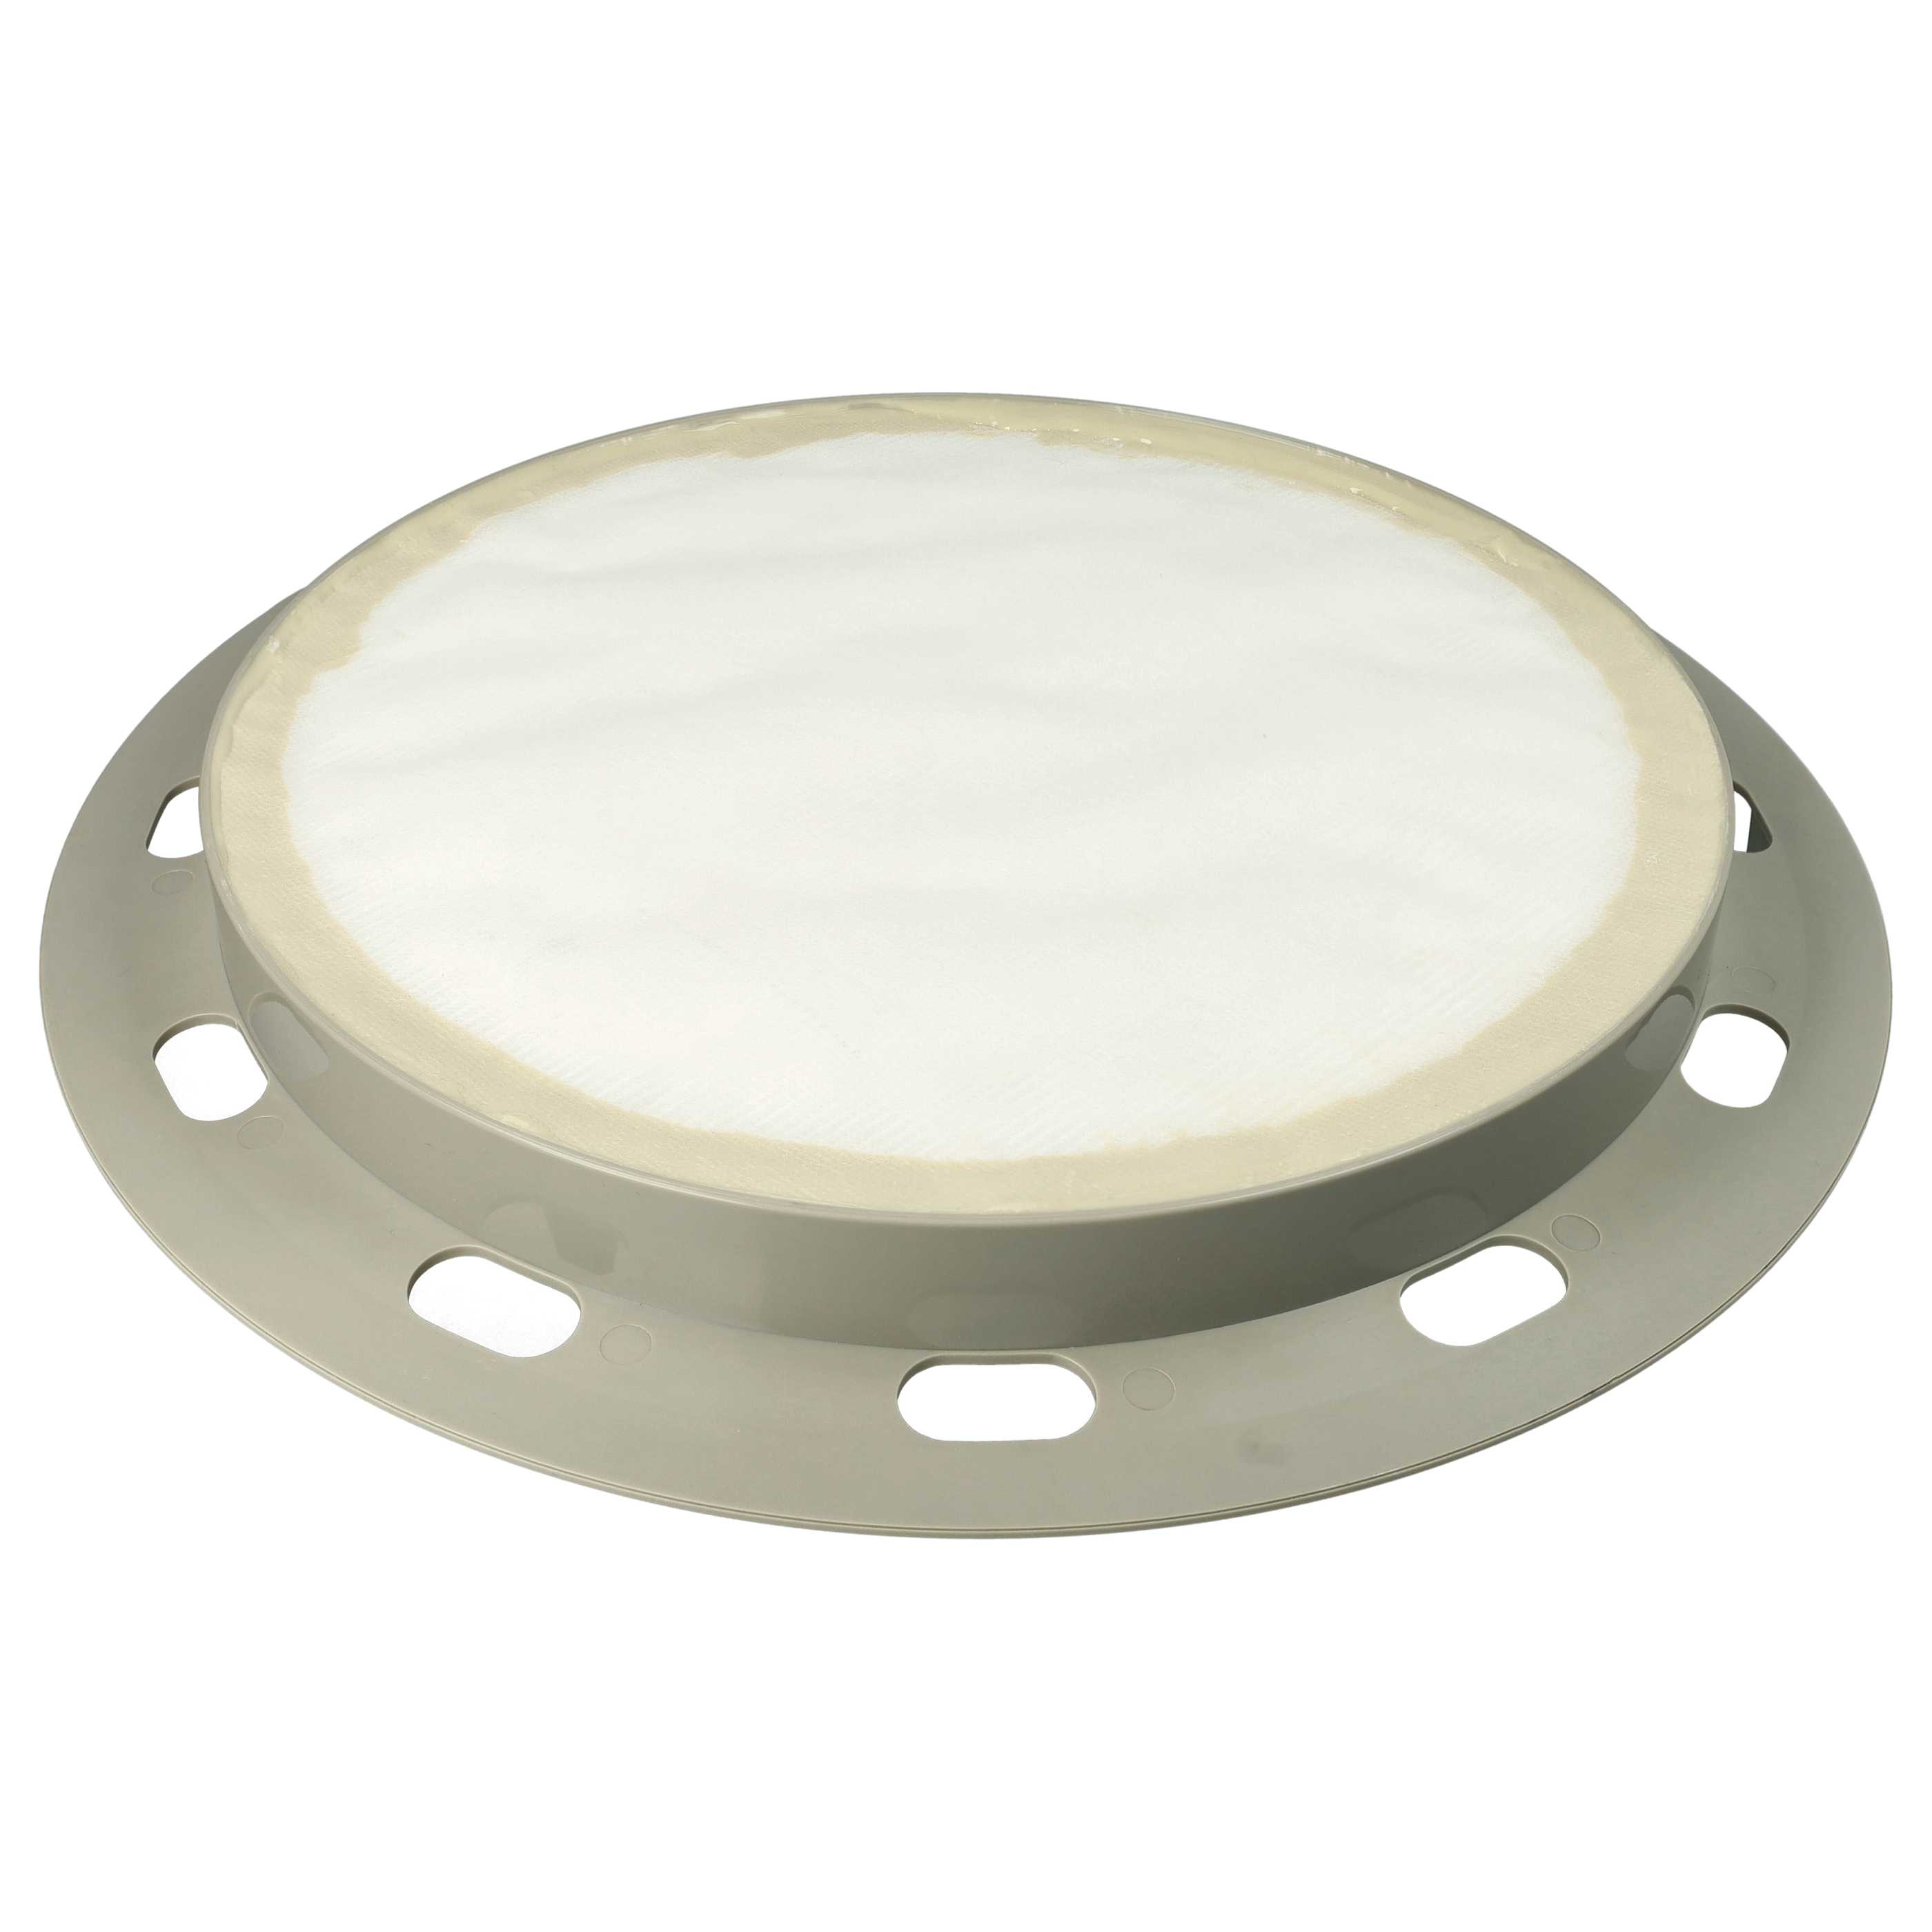 1x HEPA filter replaces Nilfisk Alto 1402666010, 140 2666 010 for Nilfisk Alto Vacuum Cleaner